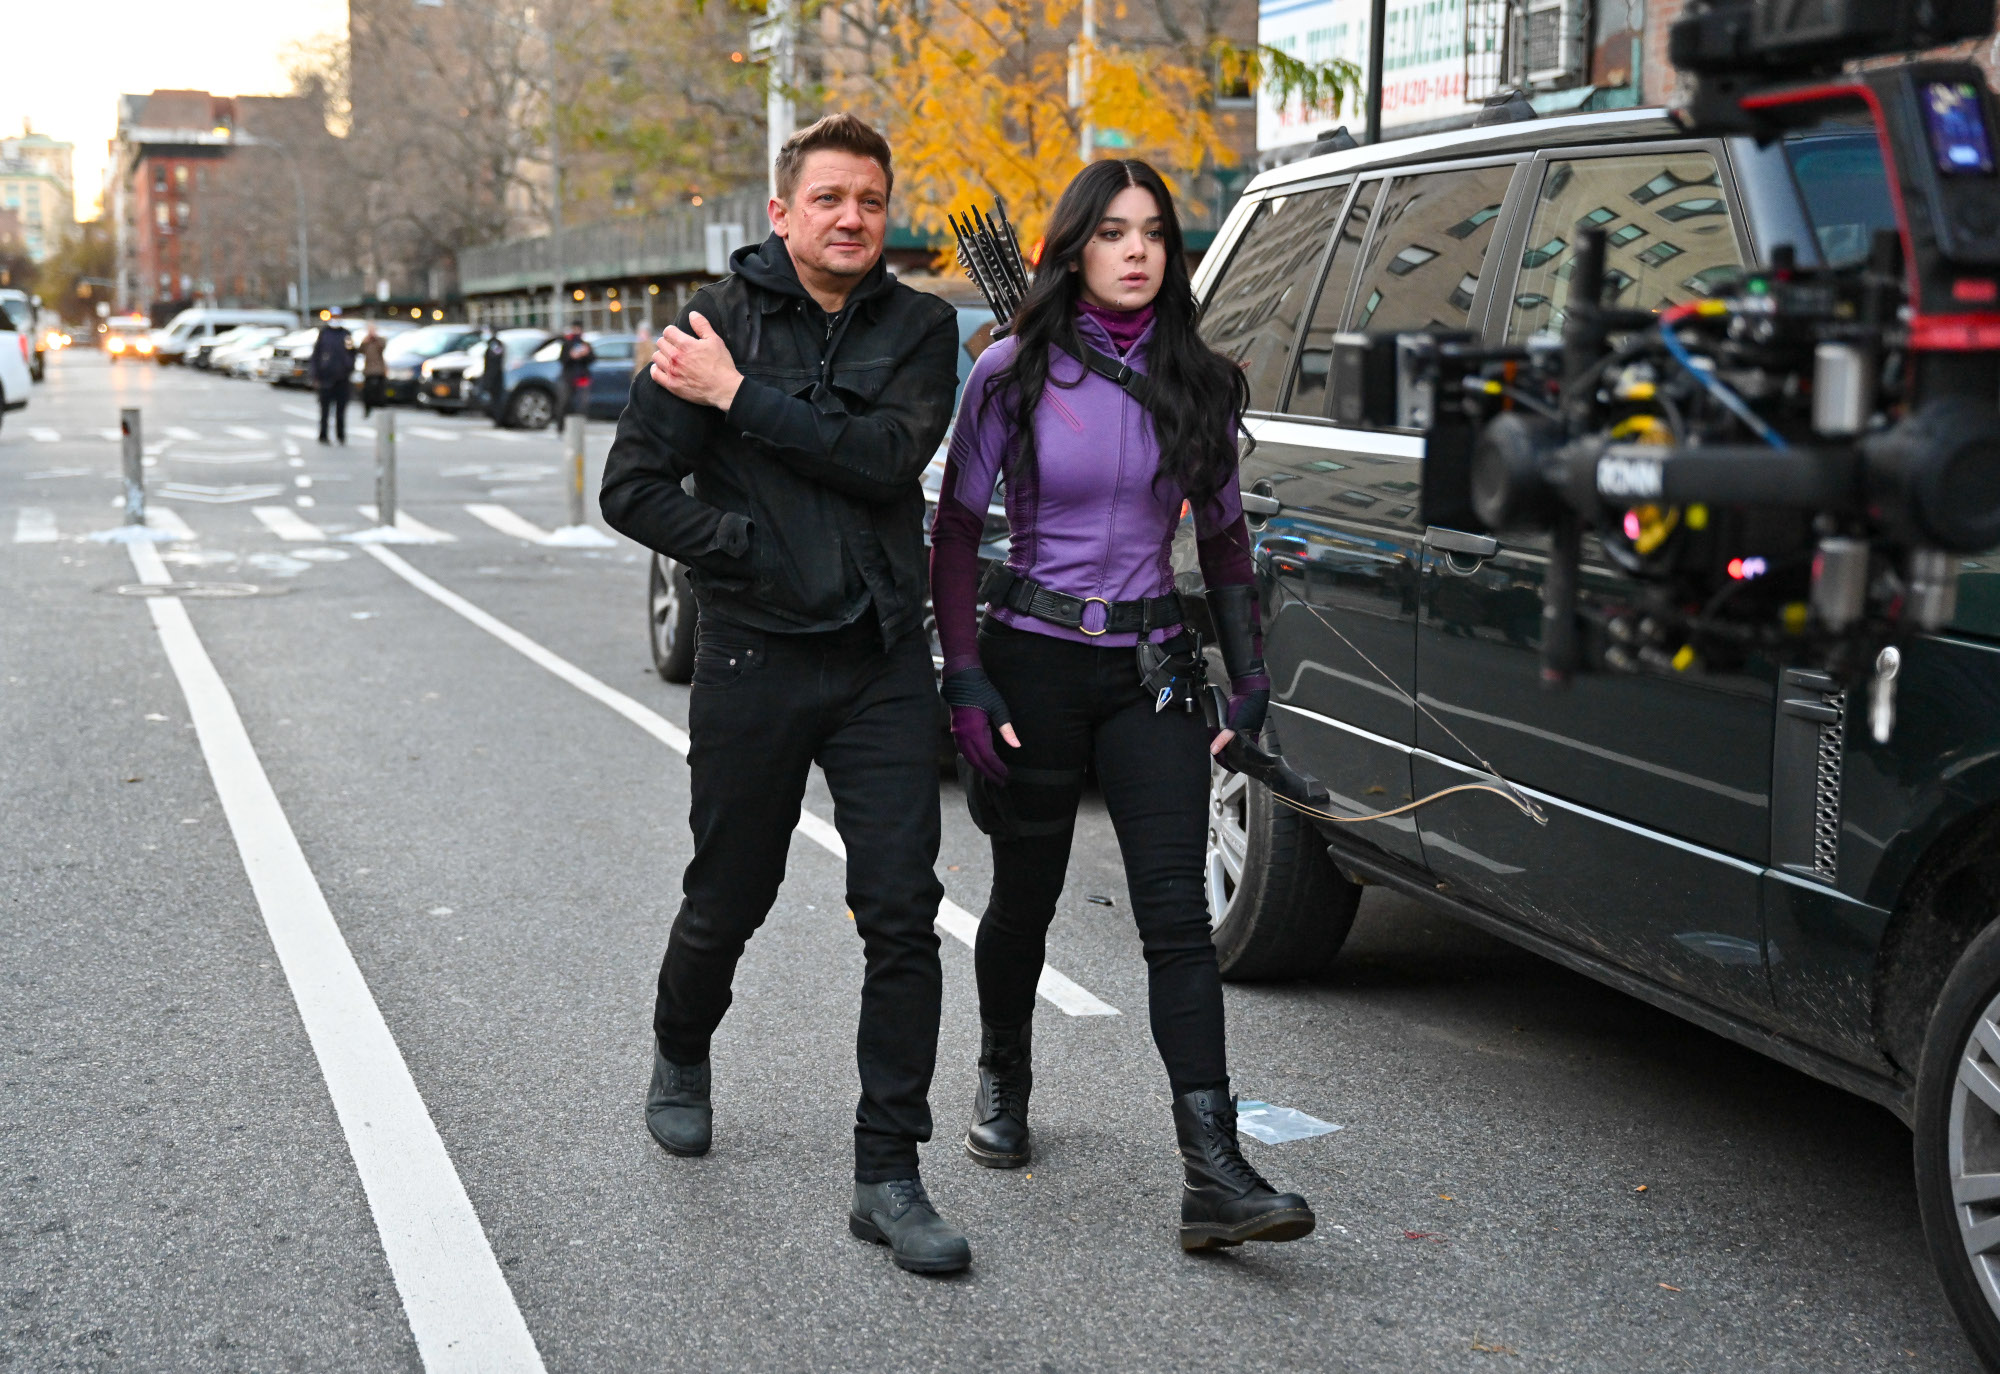 'Hawkeye' stars Jeremy Renner and Hailee Steinfeld walking down the street after filming. The new trailer for 'Hawkeye' shows it will be set during the holiday season.